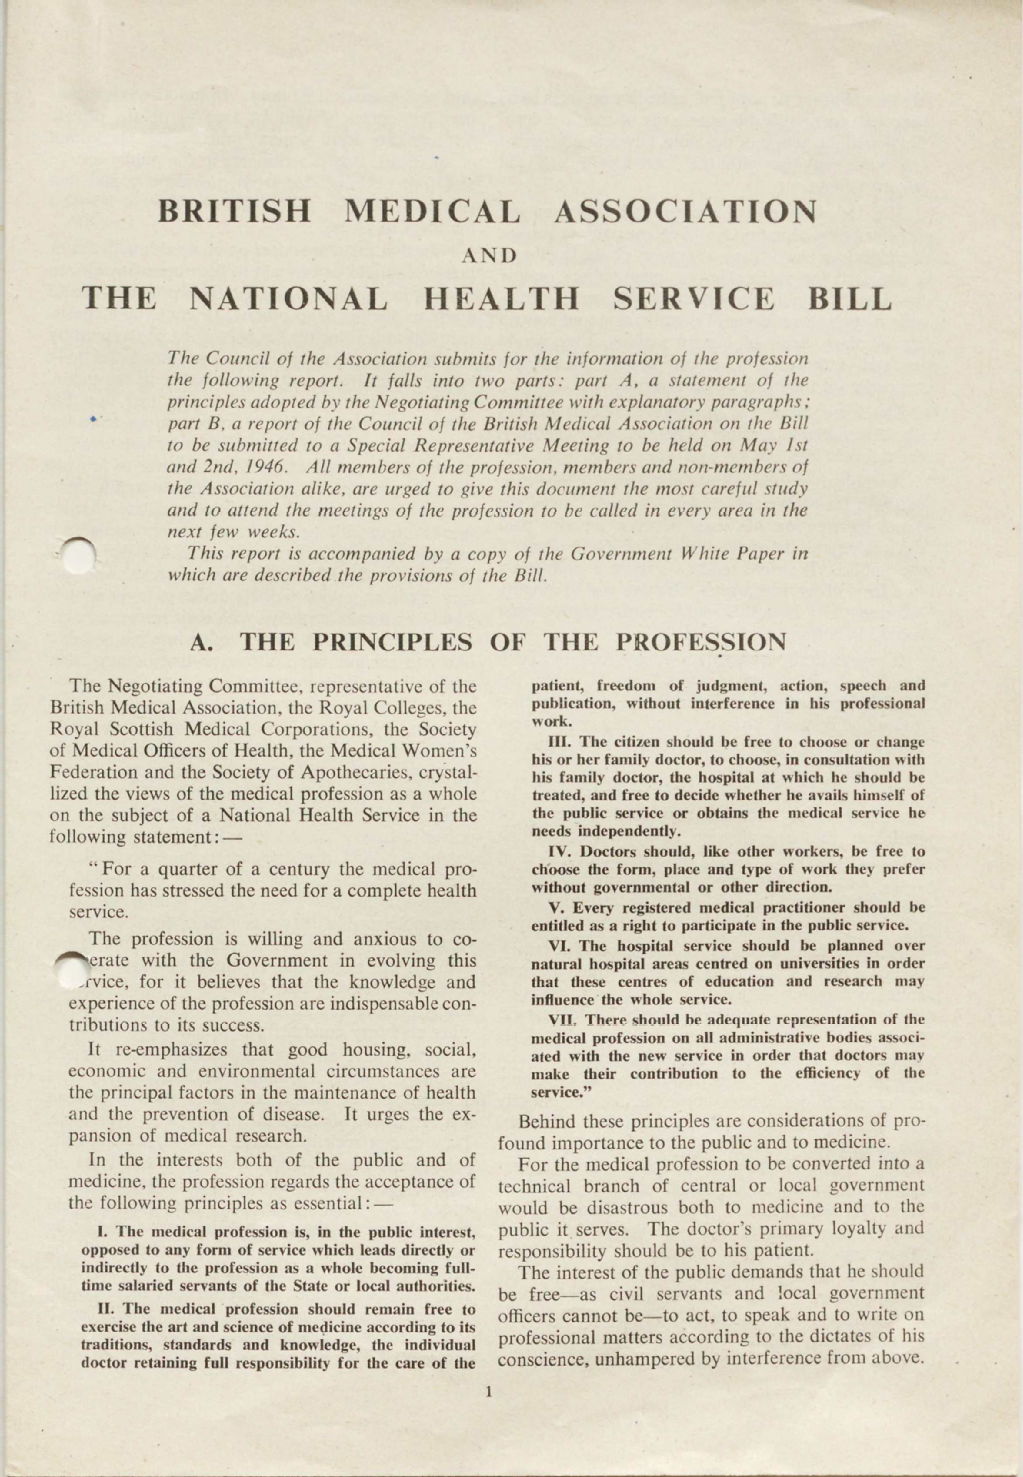 British Medical Association and the National Health Service Bill